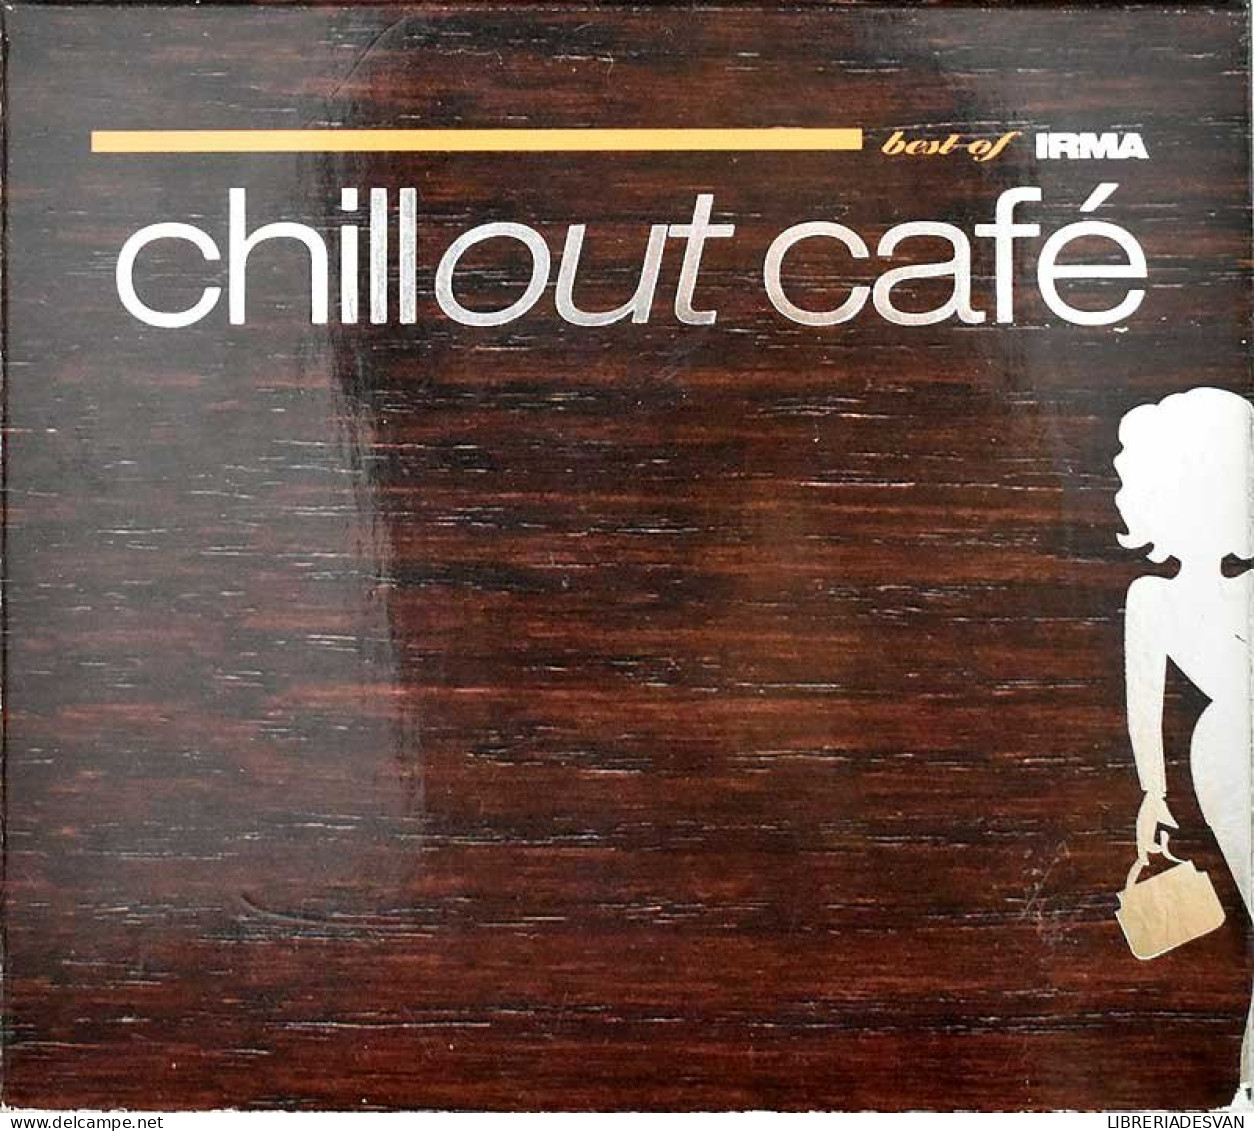 Best Of Irma Chill Out Café. 2 X CD - New Age